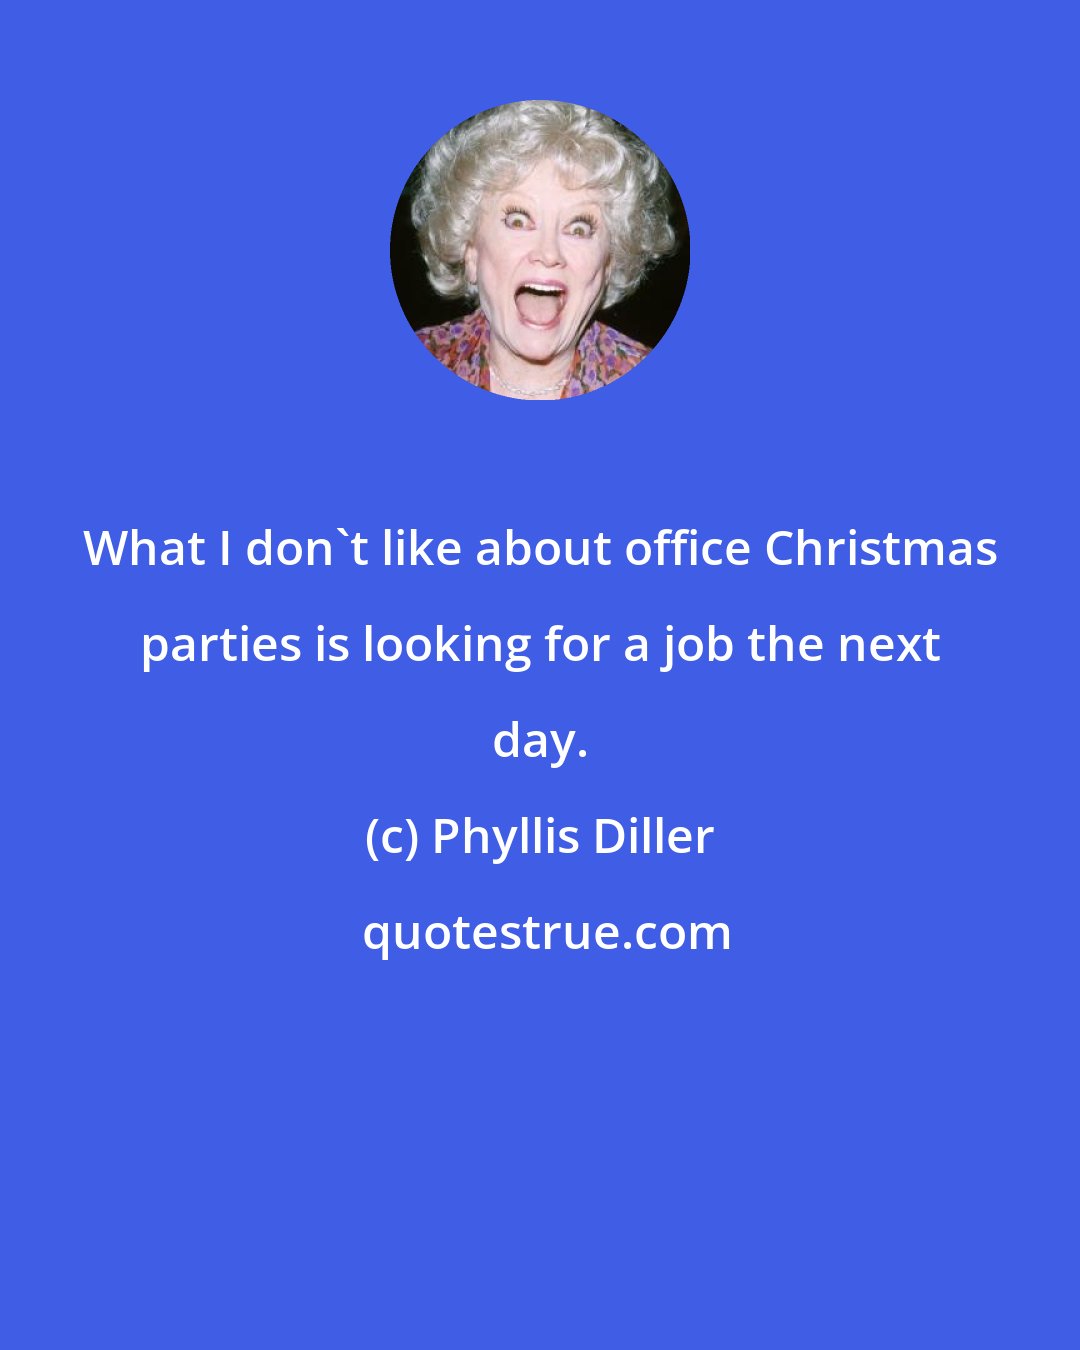 Phyllis Diller: What I don't like about office Christmas parties is looking for a job the next day.